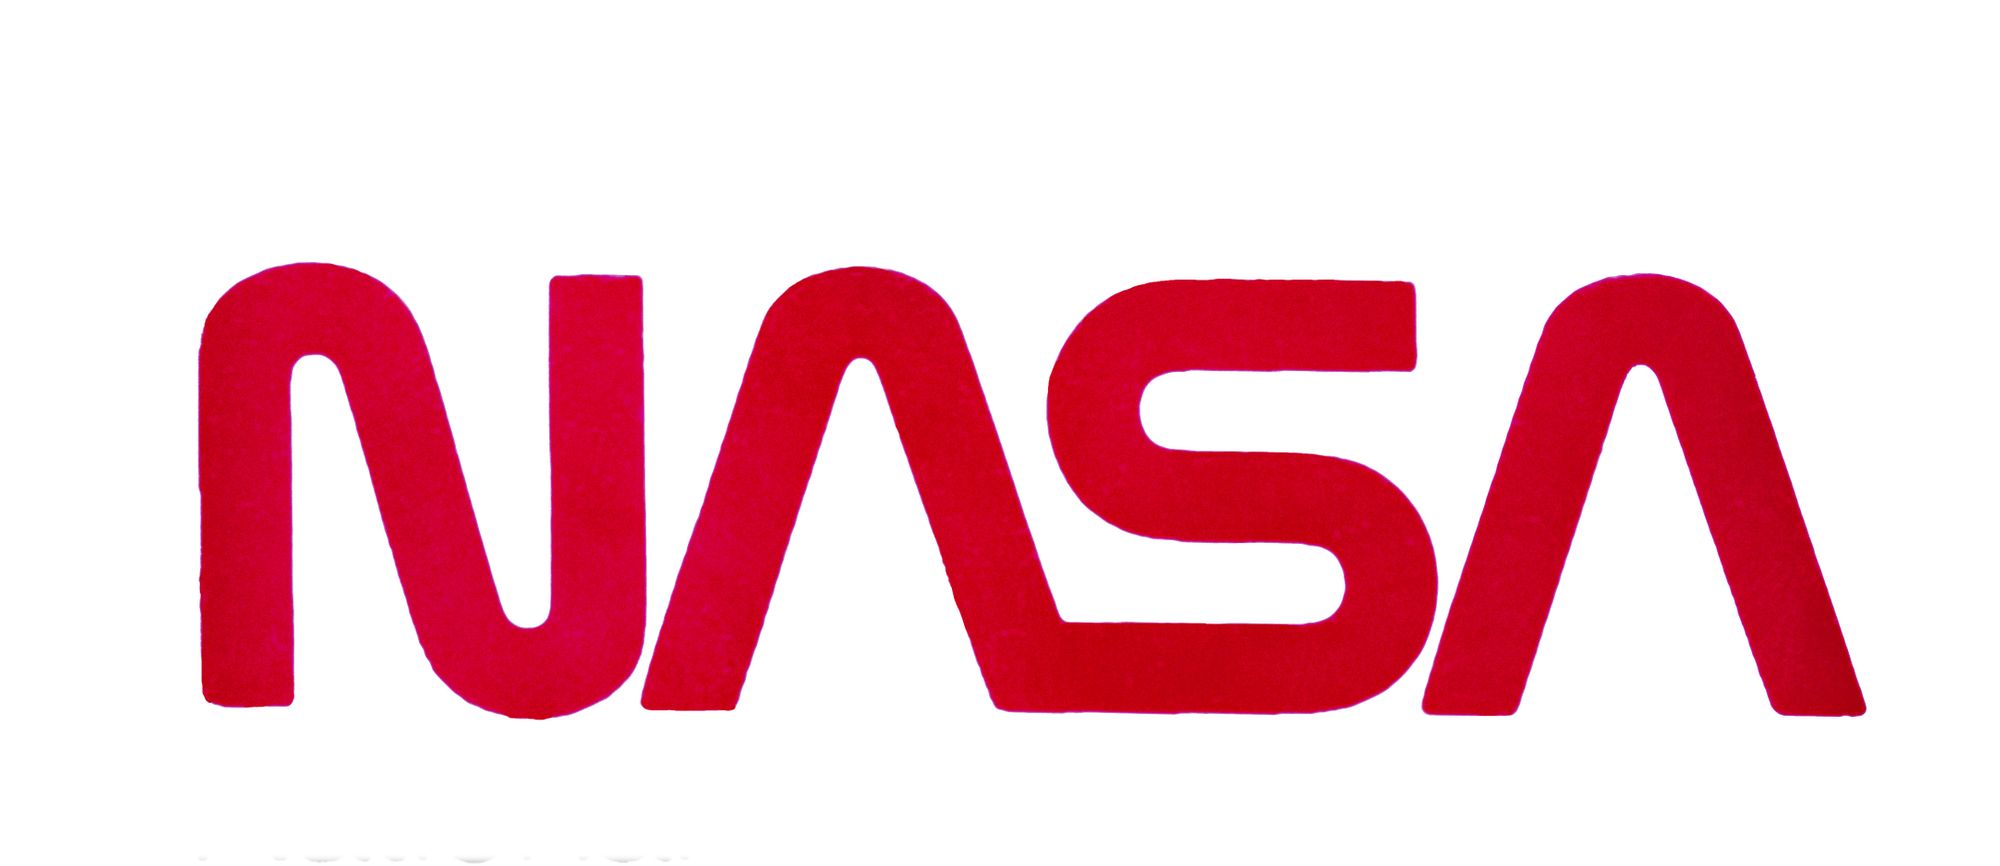 Why an old NASA logo is making a strong comeback